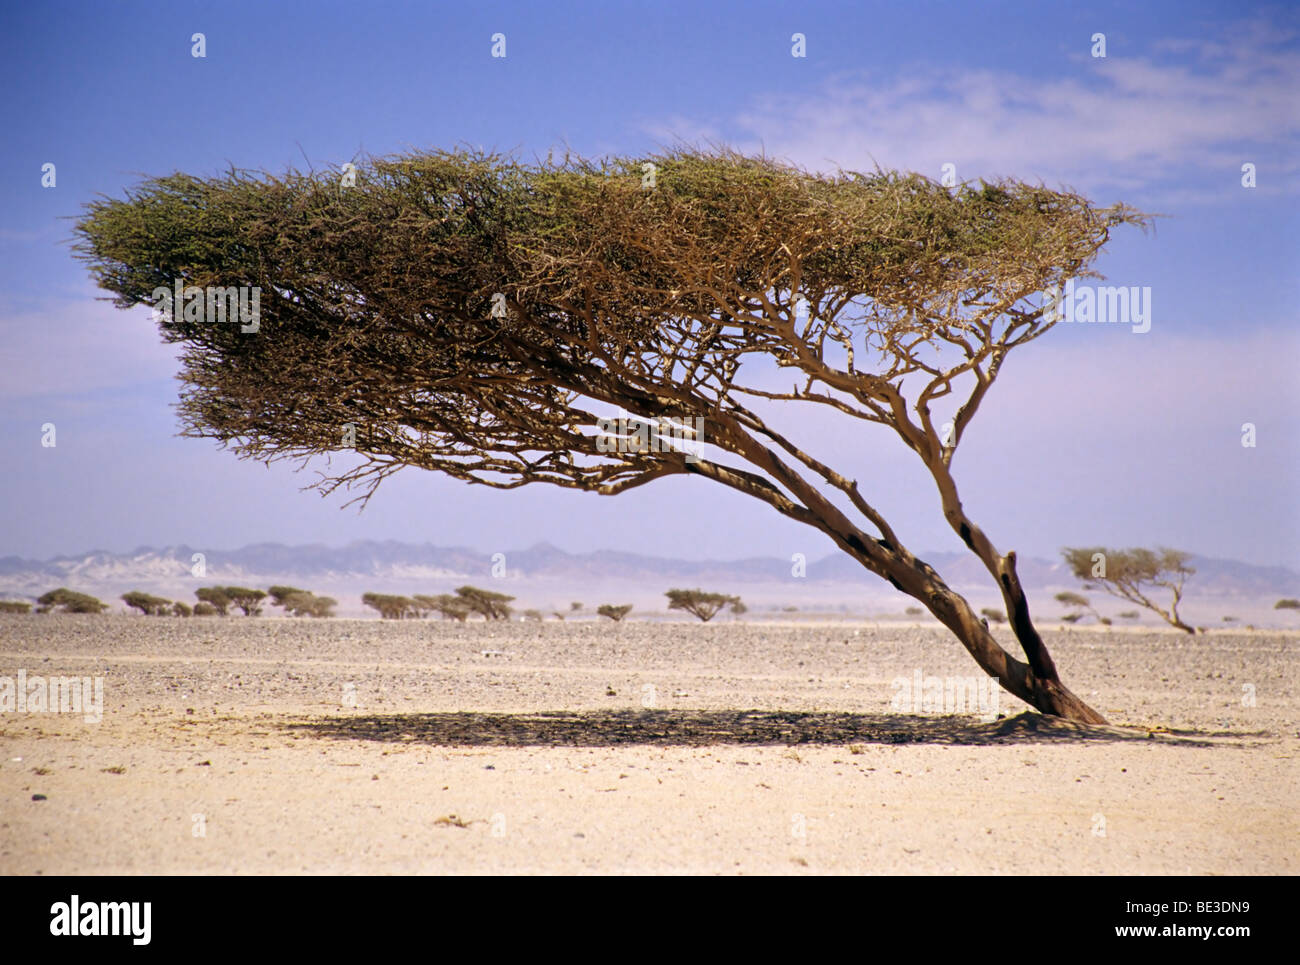 Tree bent by the wind, crooked, tree, trees, acacia, desert, Egypt, Africa Stock Photo